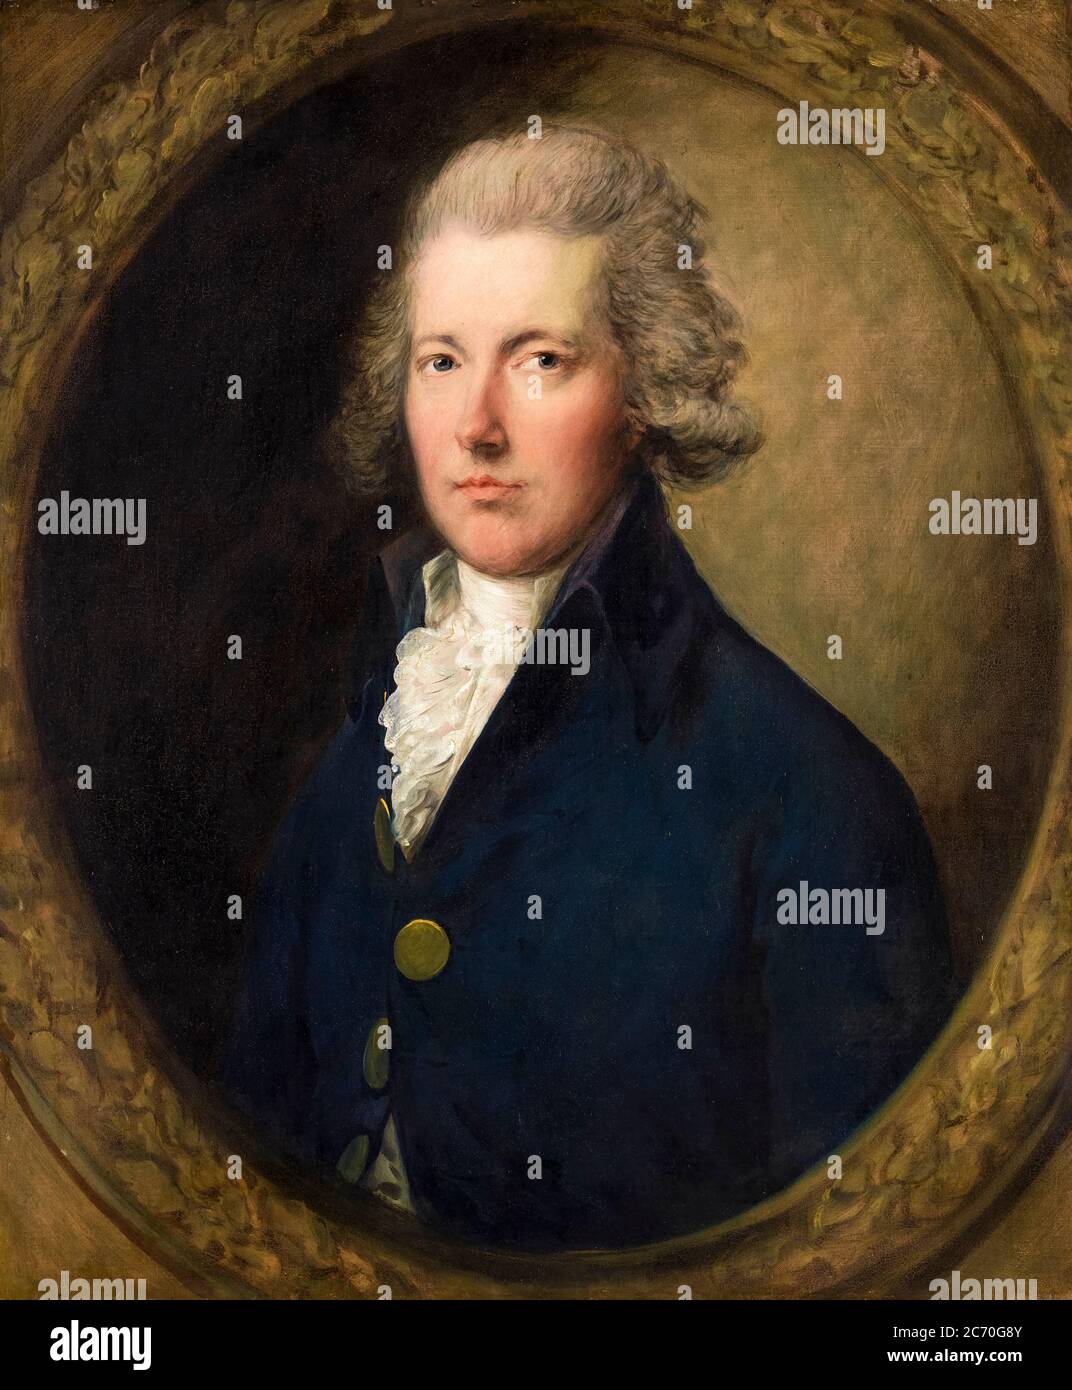 William Pitt the Younger (1759-1806), British Prime Minister 1783-1801 and 1804-1806, portrait painting by the Studio of Thomas Gainsborough, 1787-1789 Stock Photo